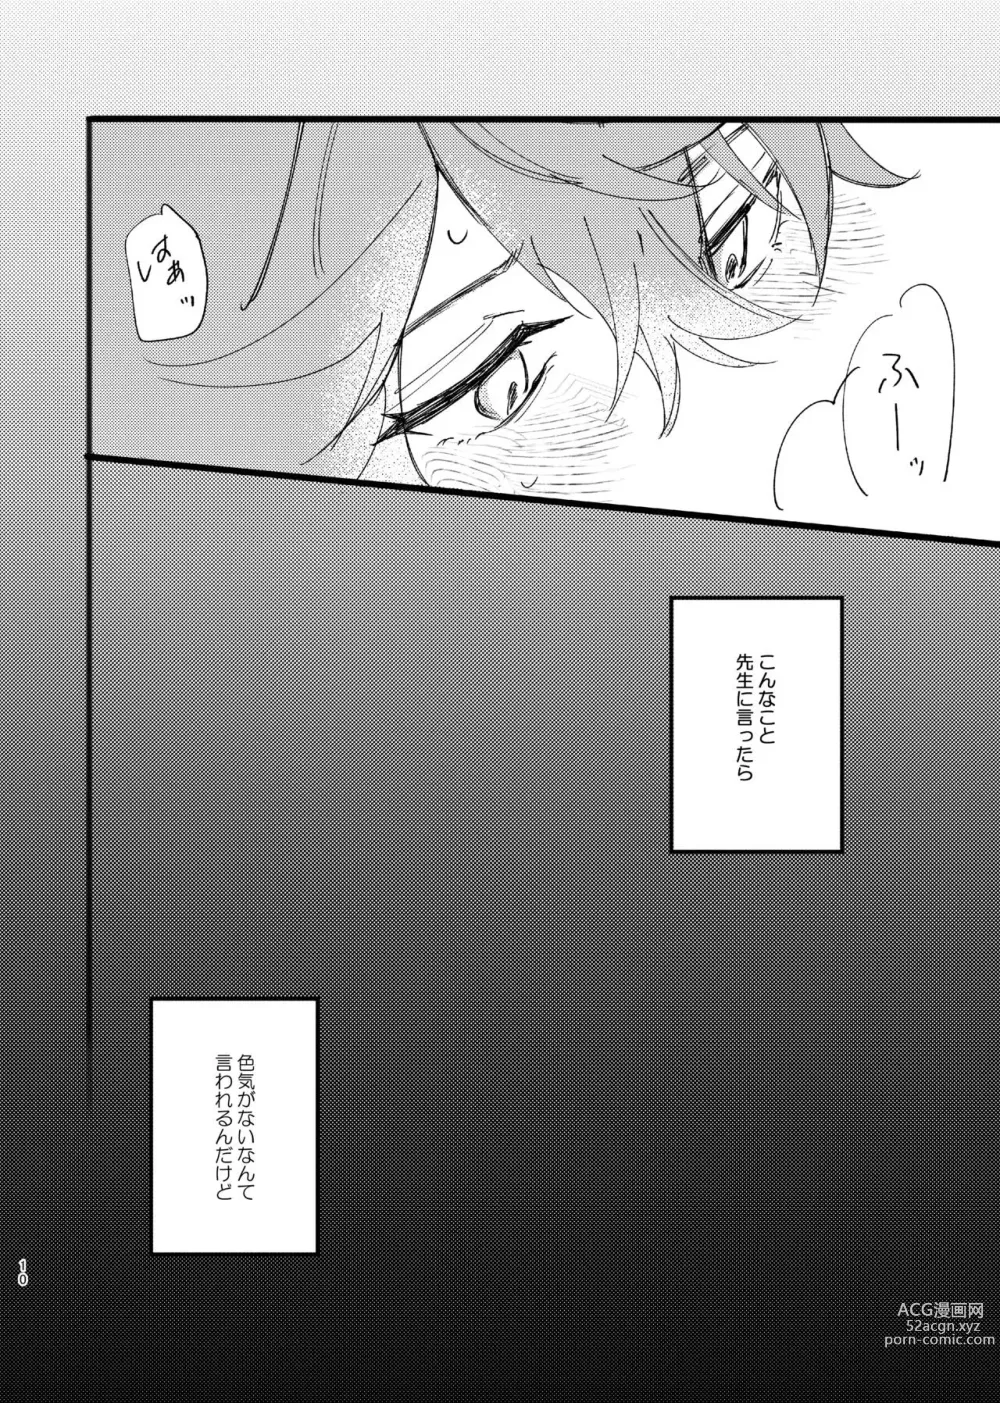 Page 9 of doujinshi convalescence